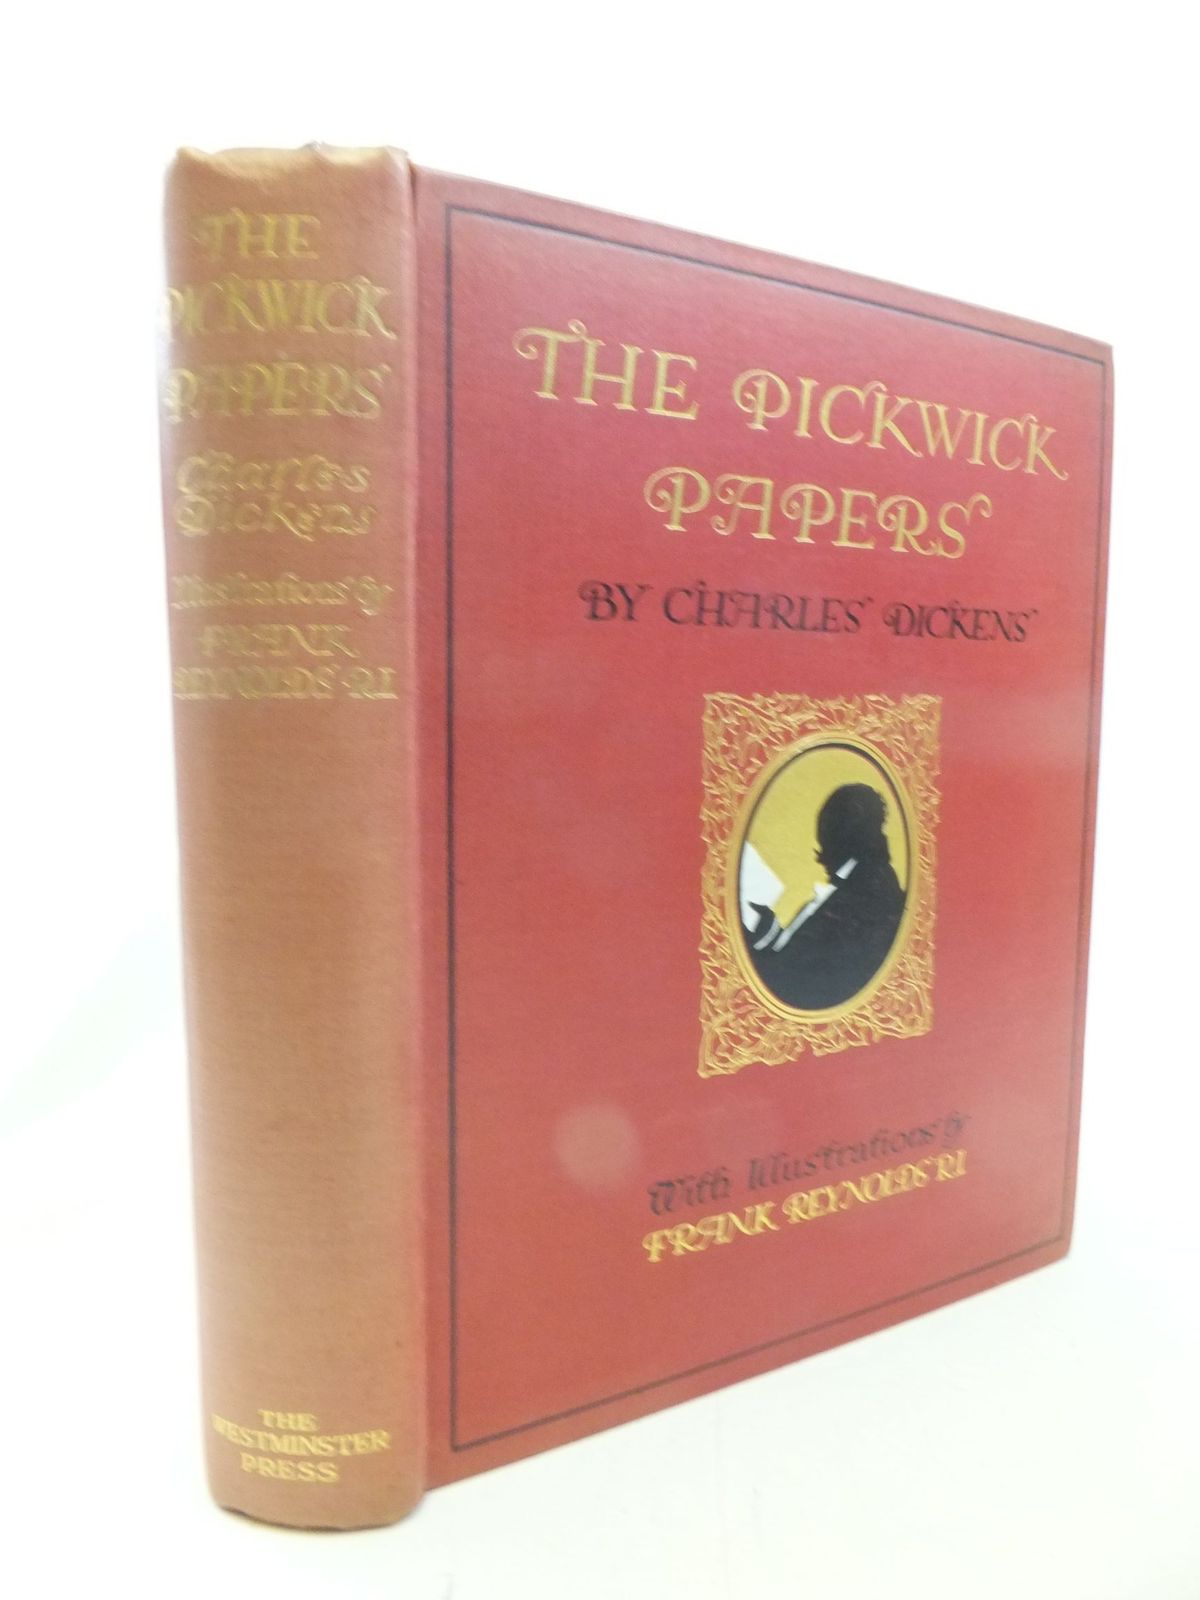 Photo of THE PICKWICK PAPERS written by Dickens, Charles illustrated by Reynolds, Frank published by Westminster Press Ltd. (STOCK CODE: 2114698)  for sale by Stella & Rose's Books